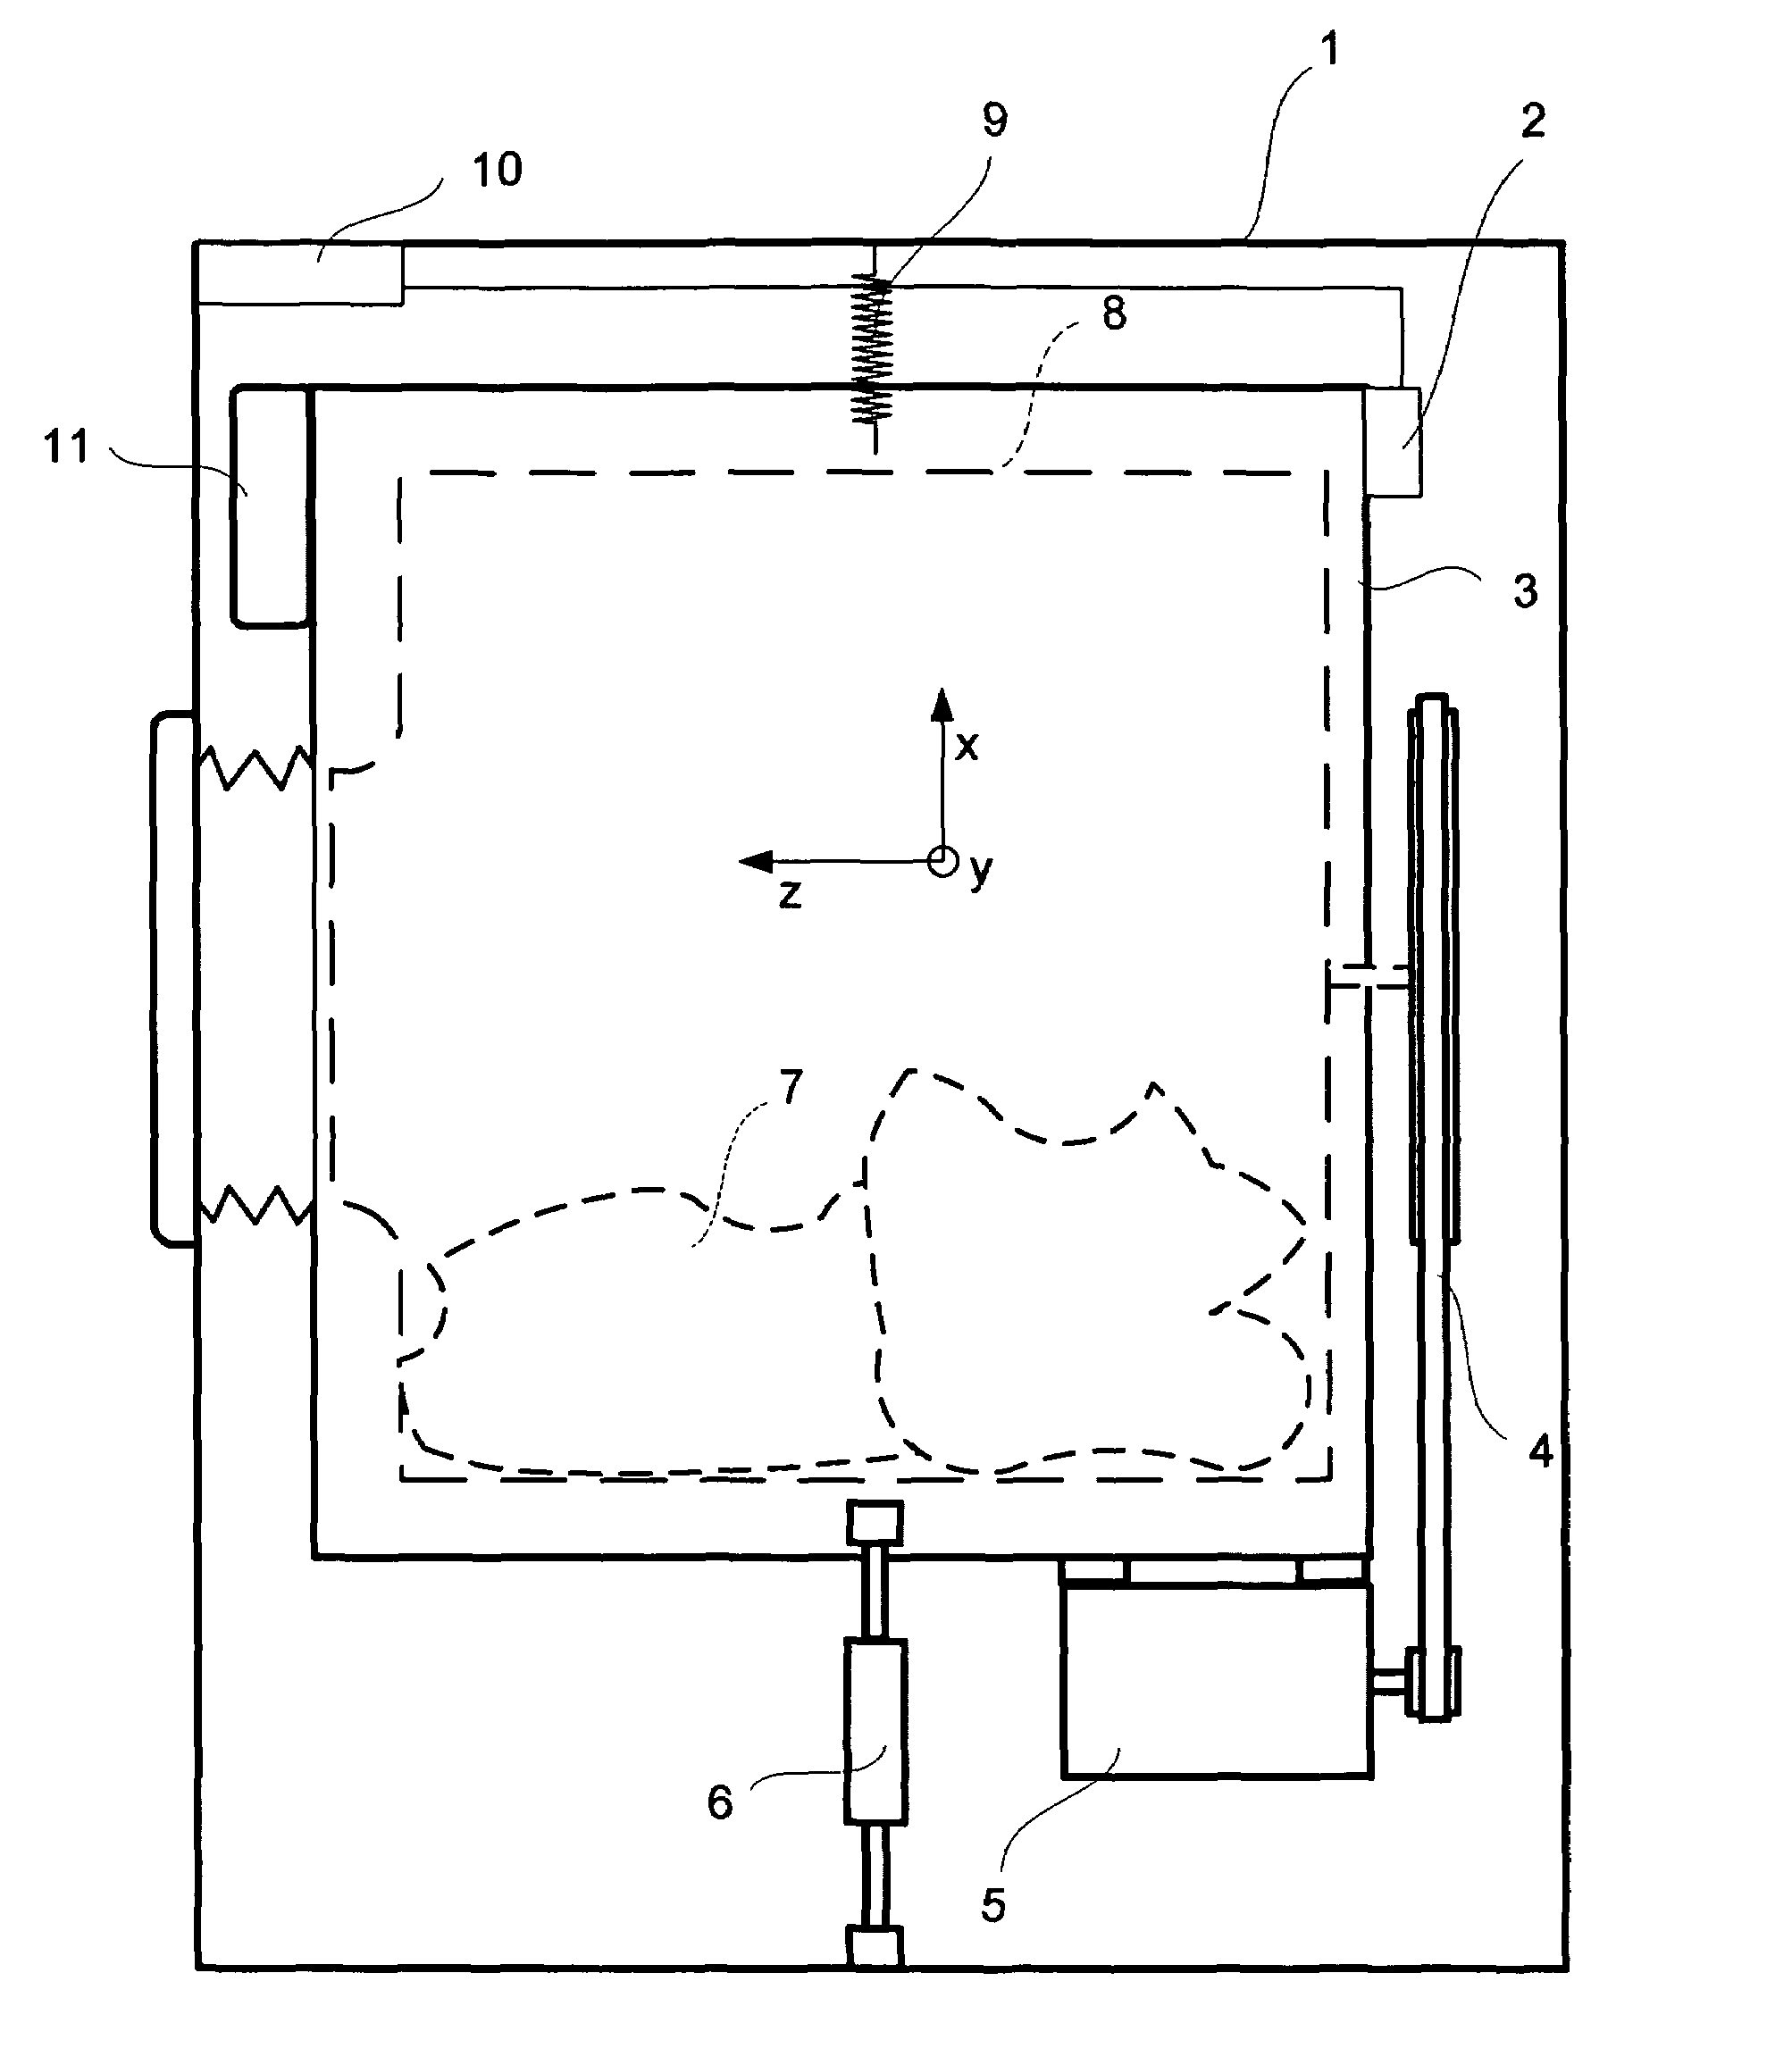 Method for the control of a spinning cycle of a washing machine and a washing machine suitable for performing said method